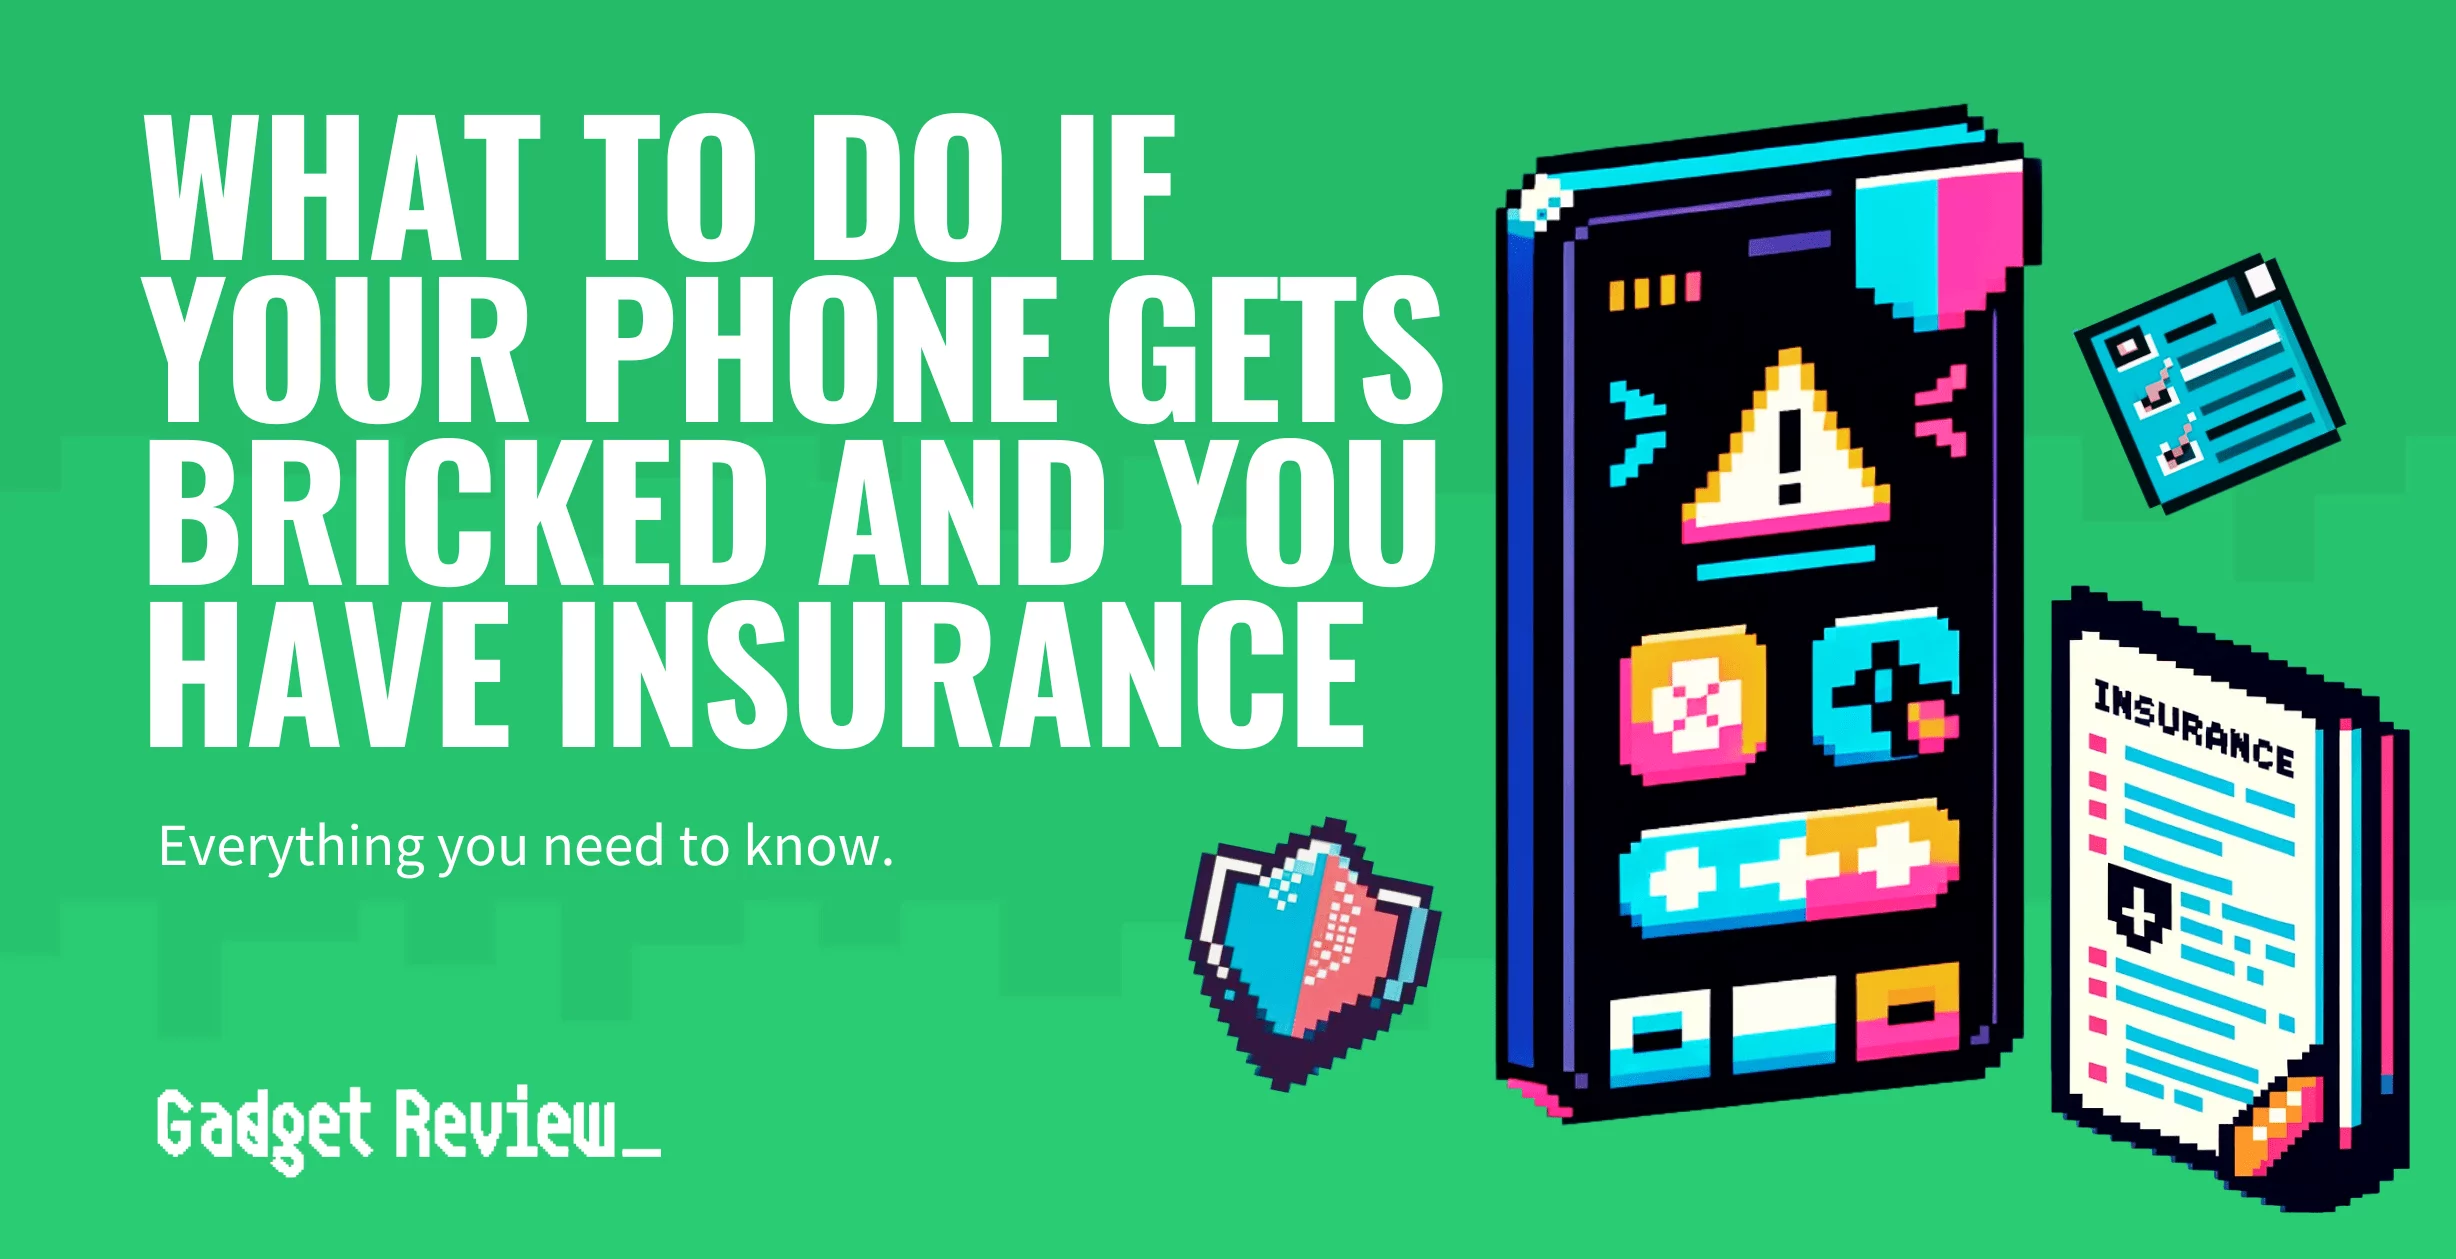 Bricked Android Device and Phone Insurance Coverage: Is It Covered?